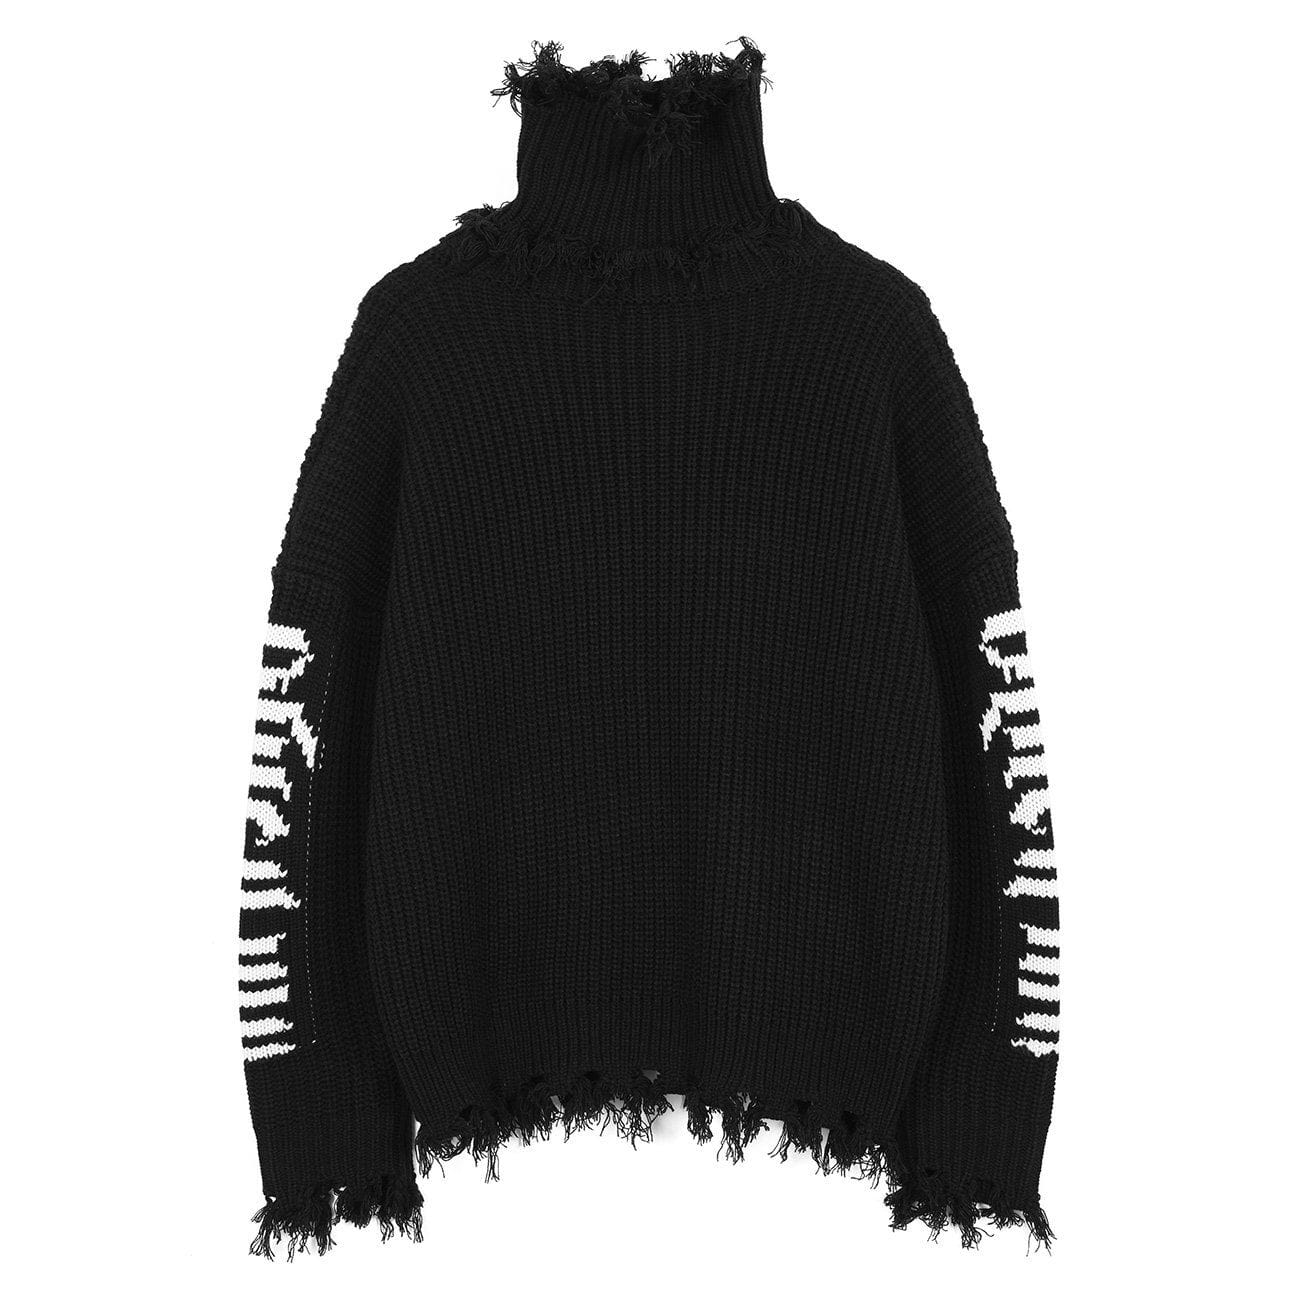 Ripped Embroidery Turtleneck Sweater Streetwear Brand Techwear Combat Tactical YUGEN THEORY